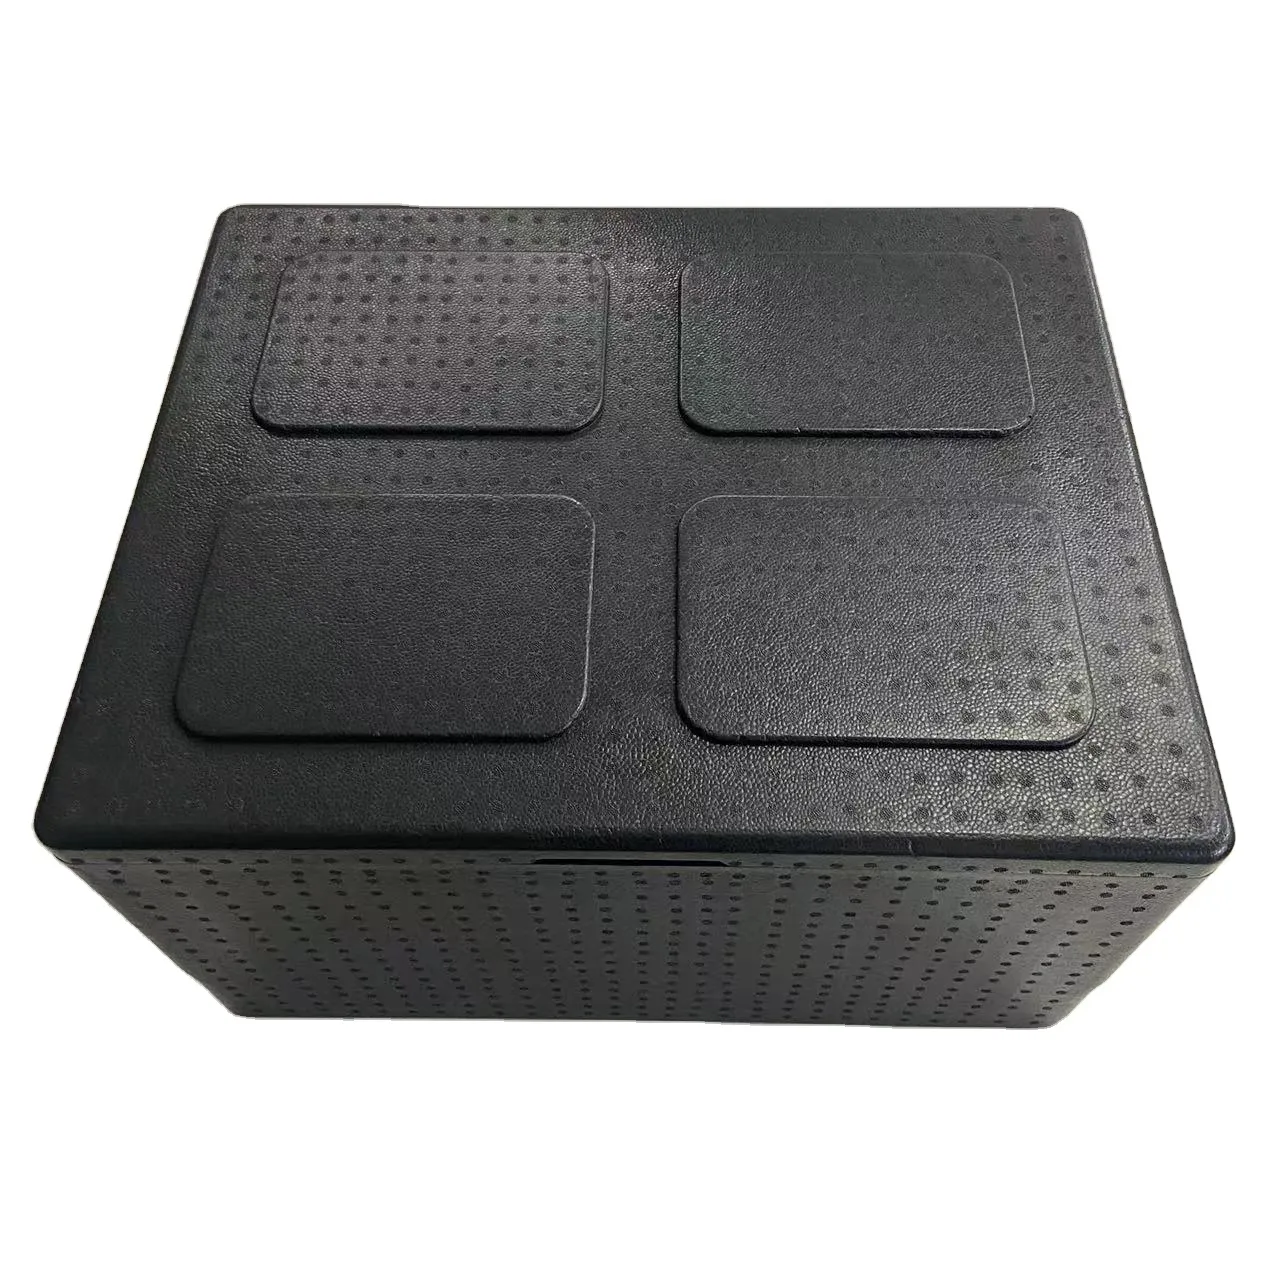 Black Epp Foam Cooler Box Packaging Box Food Customized 3 Day Cold Insulated Shipping Box